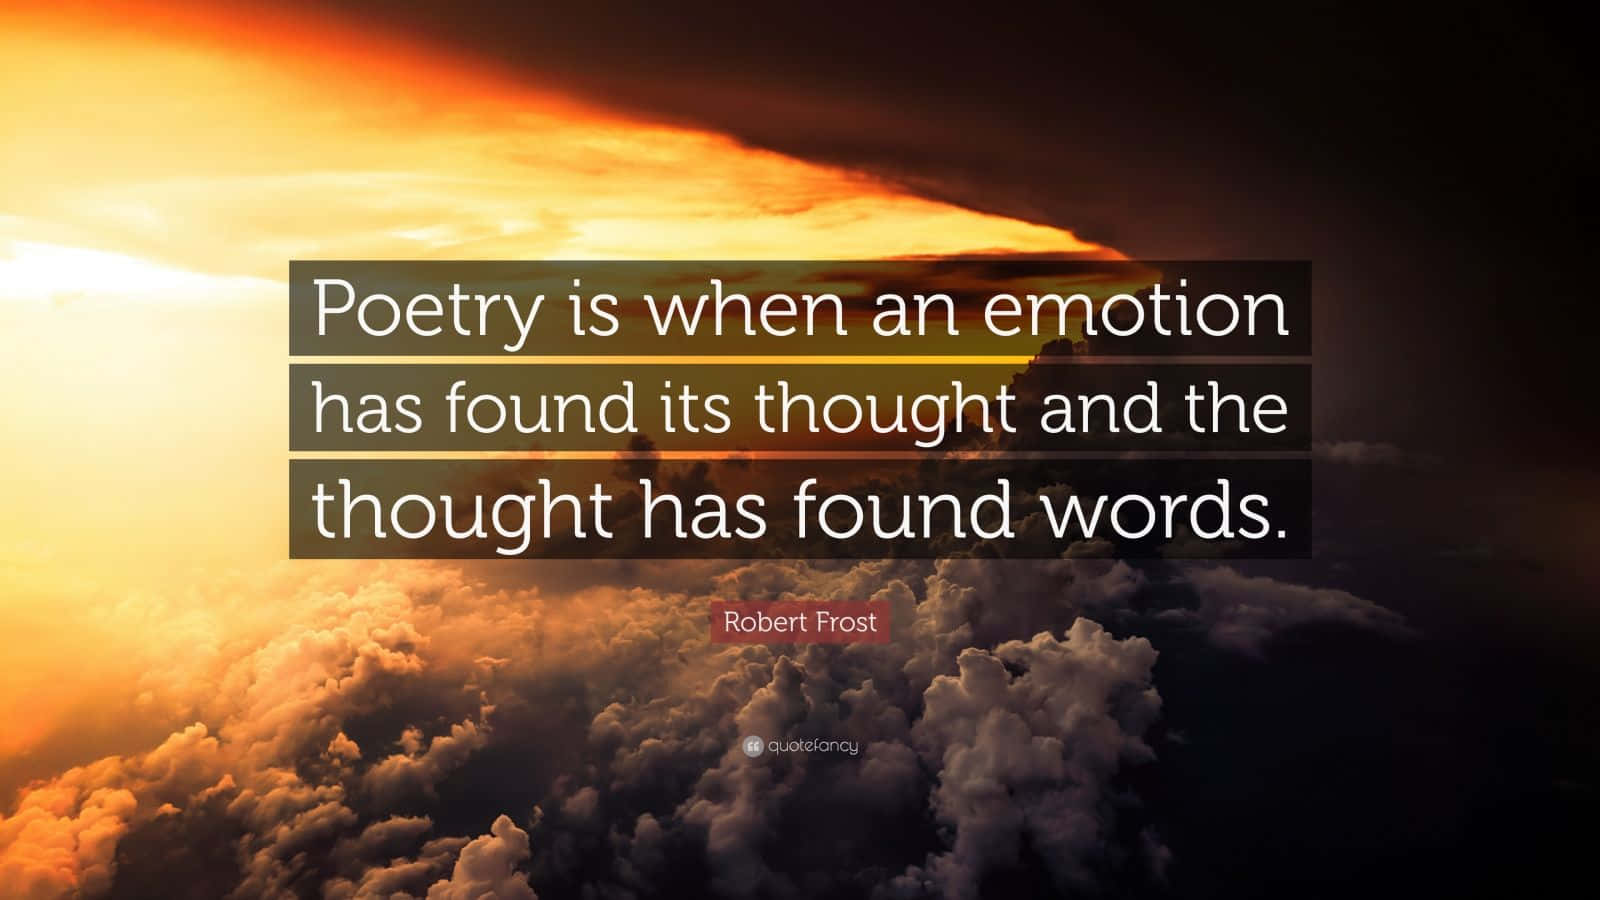 Poetry Is When An Emotion Has Found Thought And The Thought Has Found Words